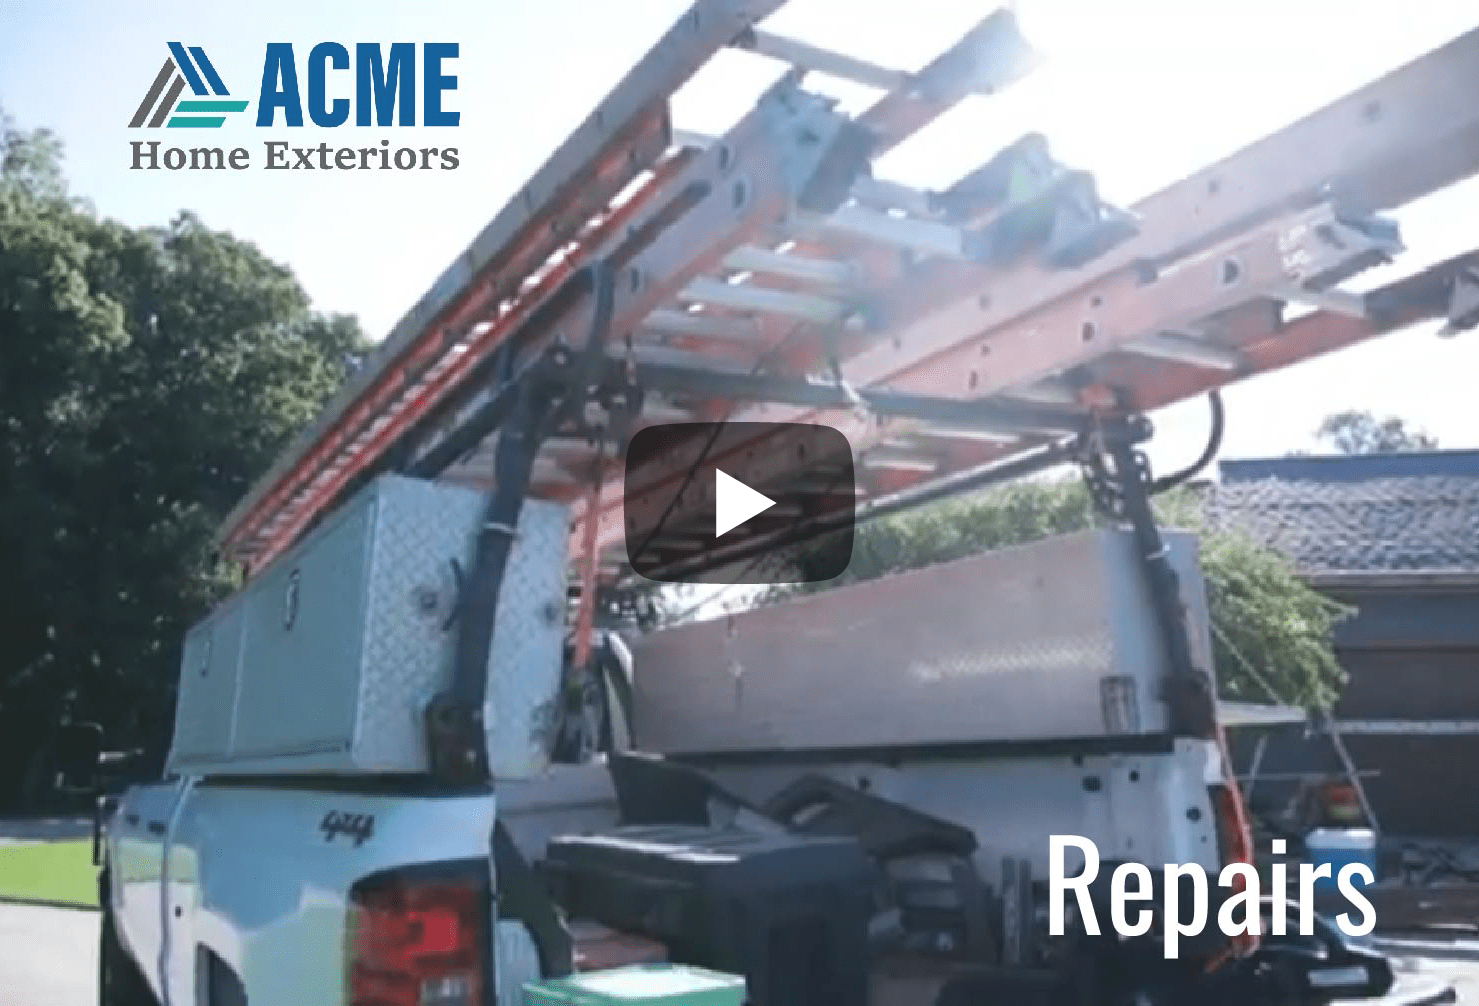 Acme vehicle seen from behind carrying materials. Repairs written and play button.